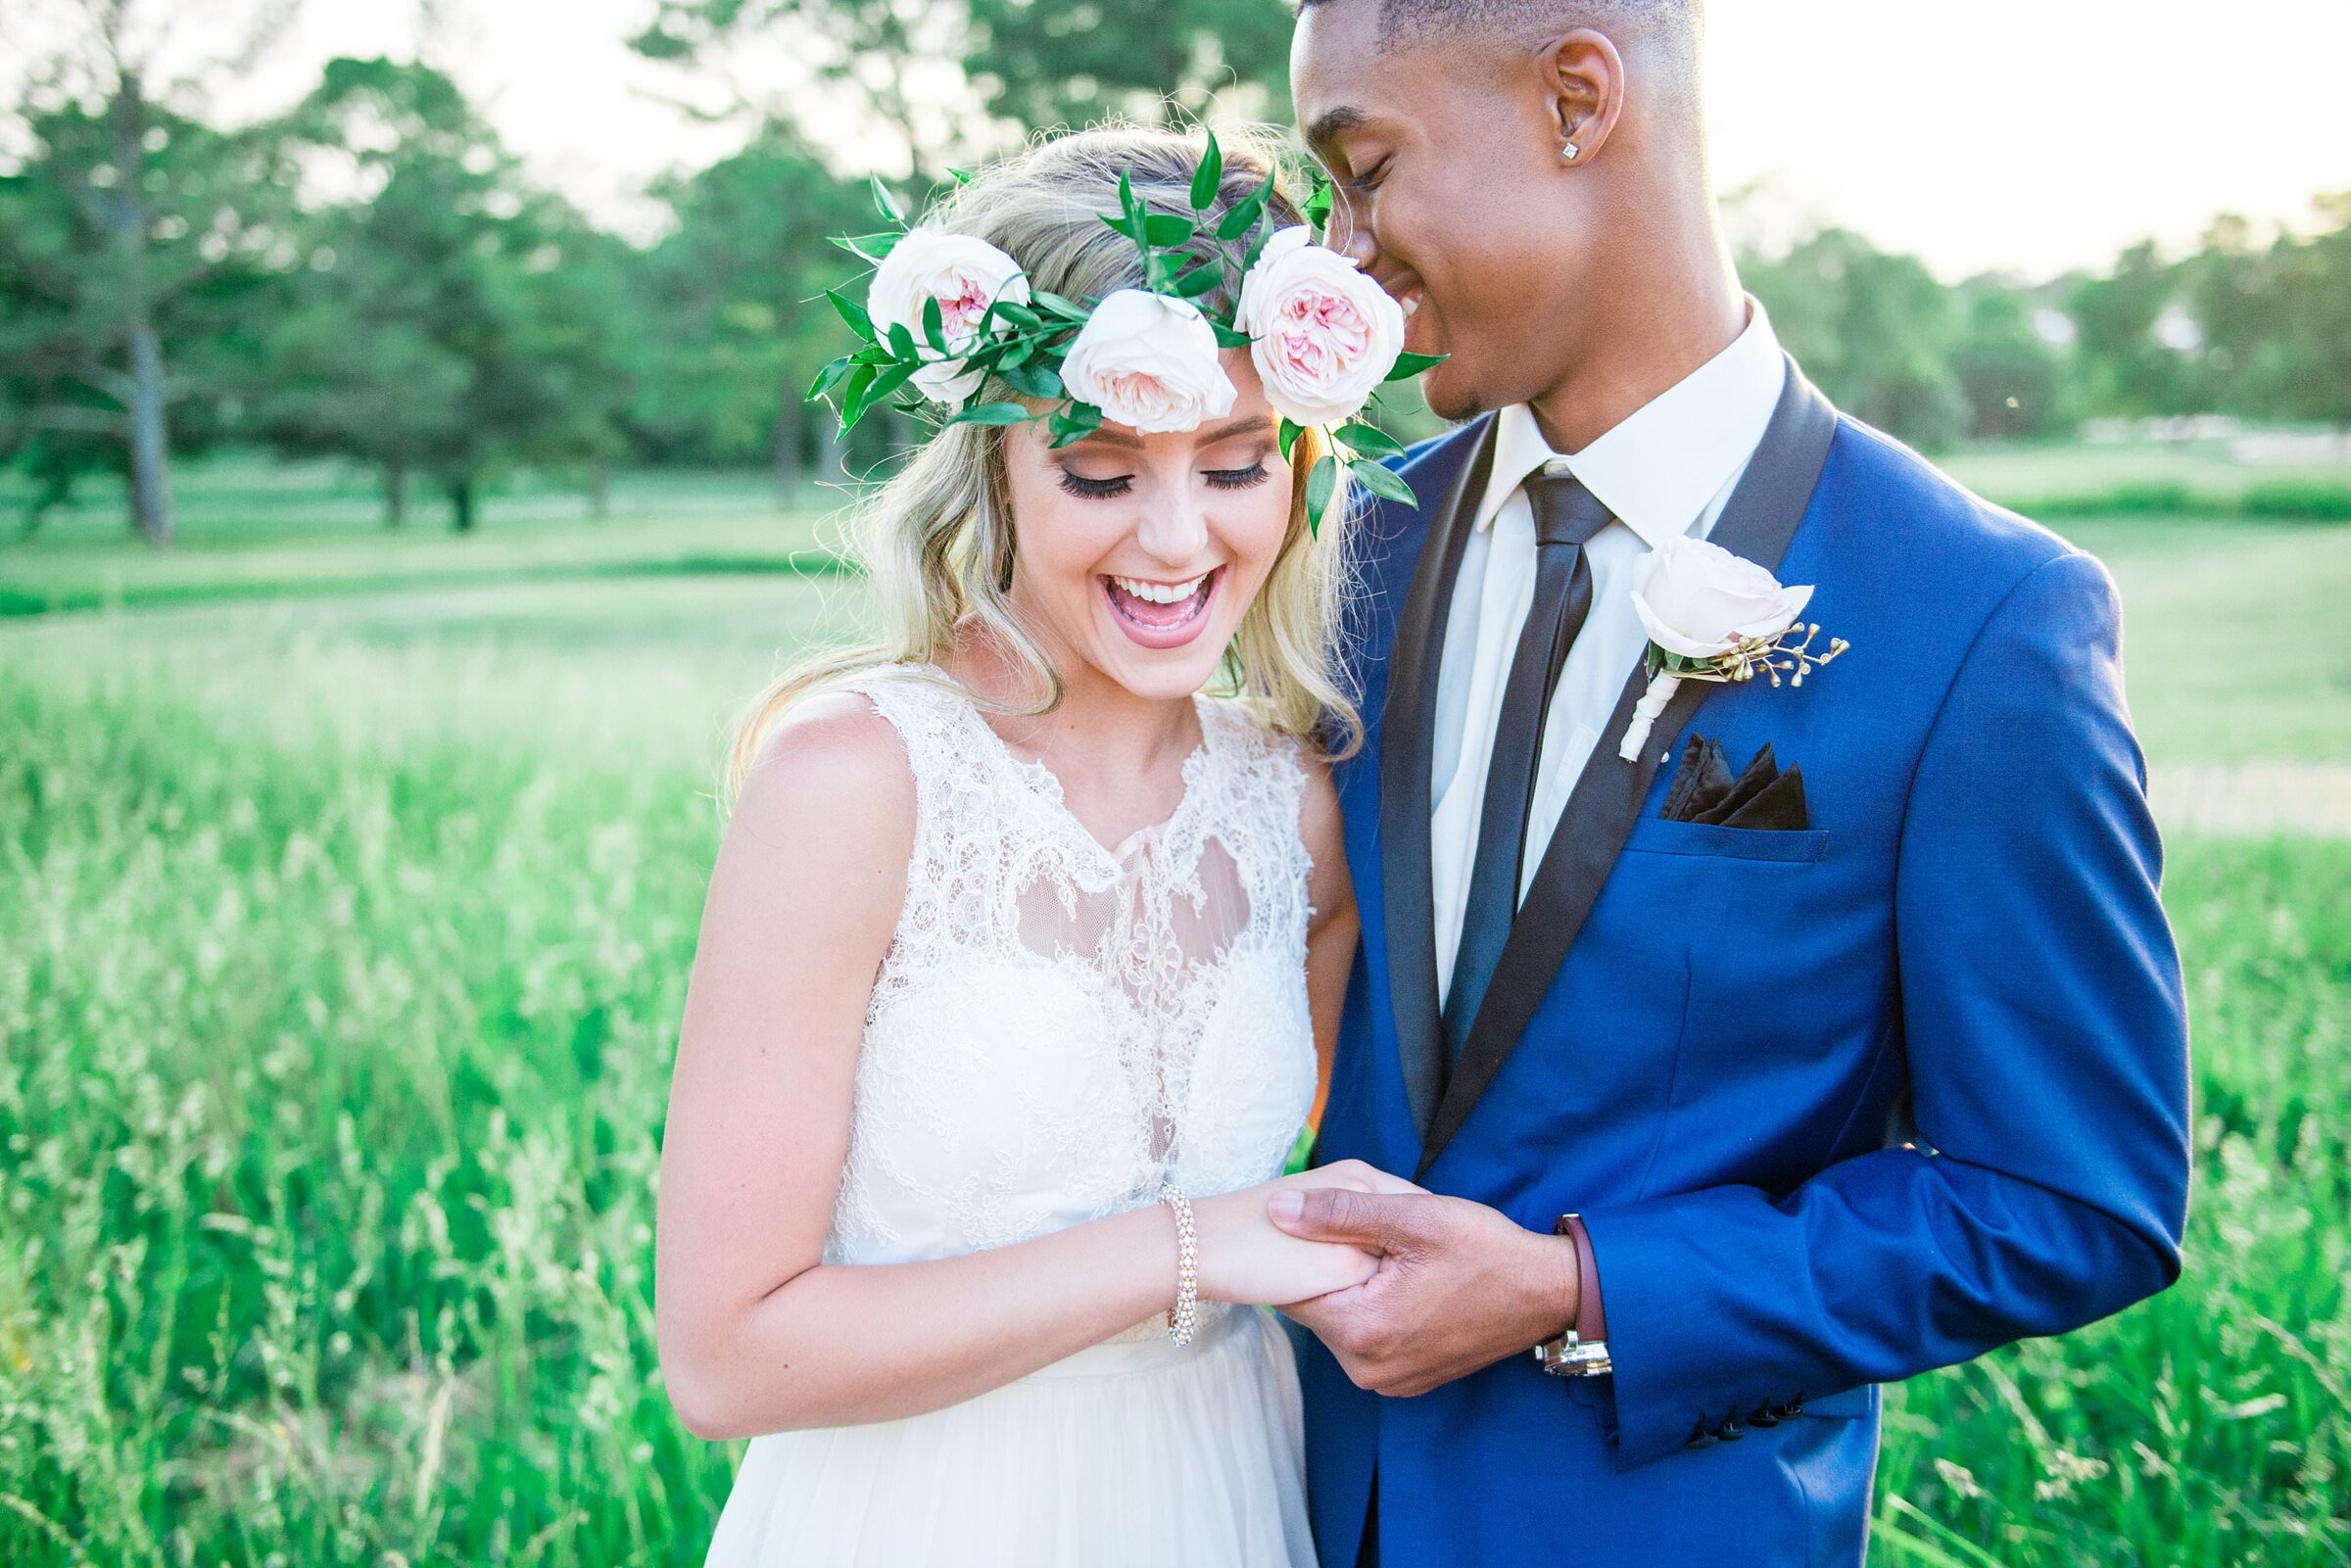 Groom wearing cobalt blue suit with black  edging holding hands with his bride on their wedding day, she is wearing a pink garden rose flower crown with greenery